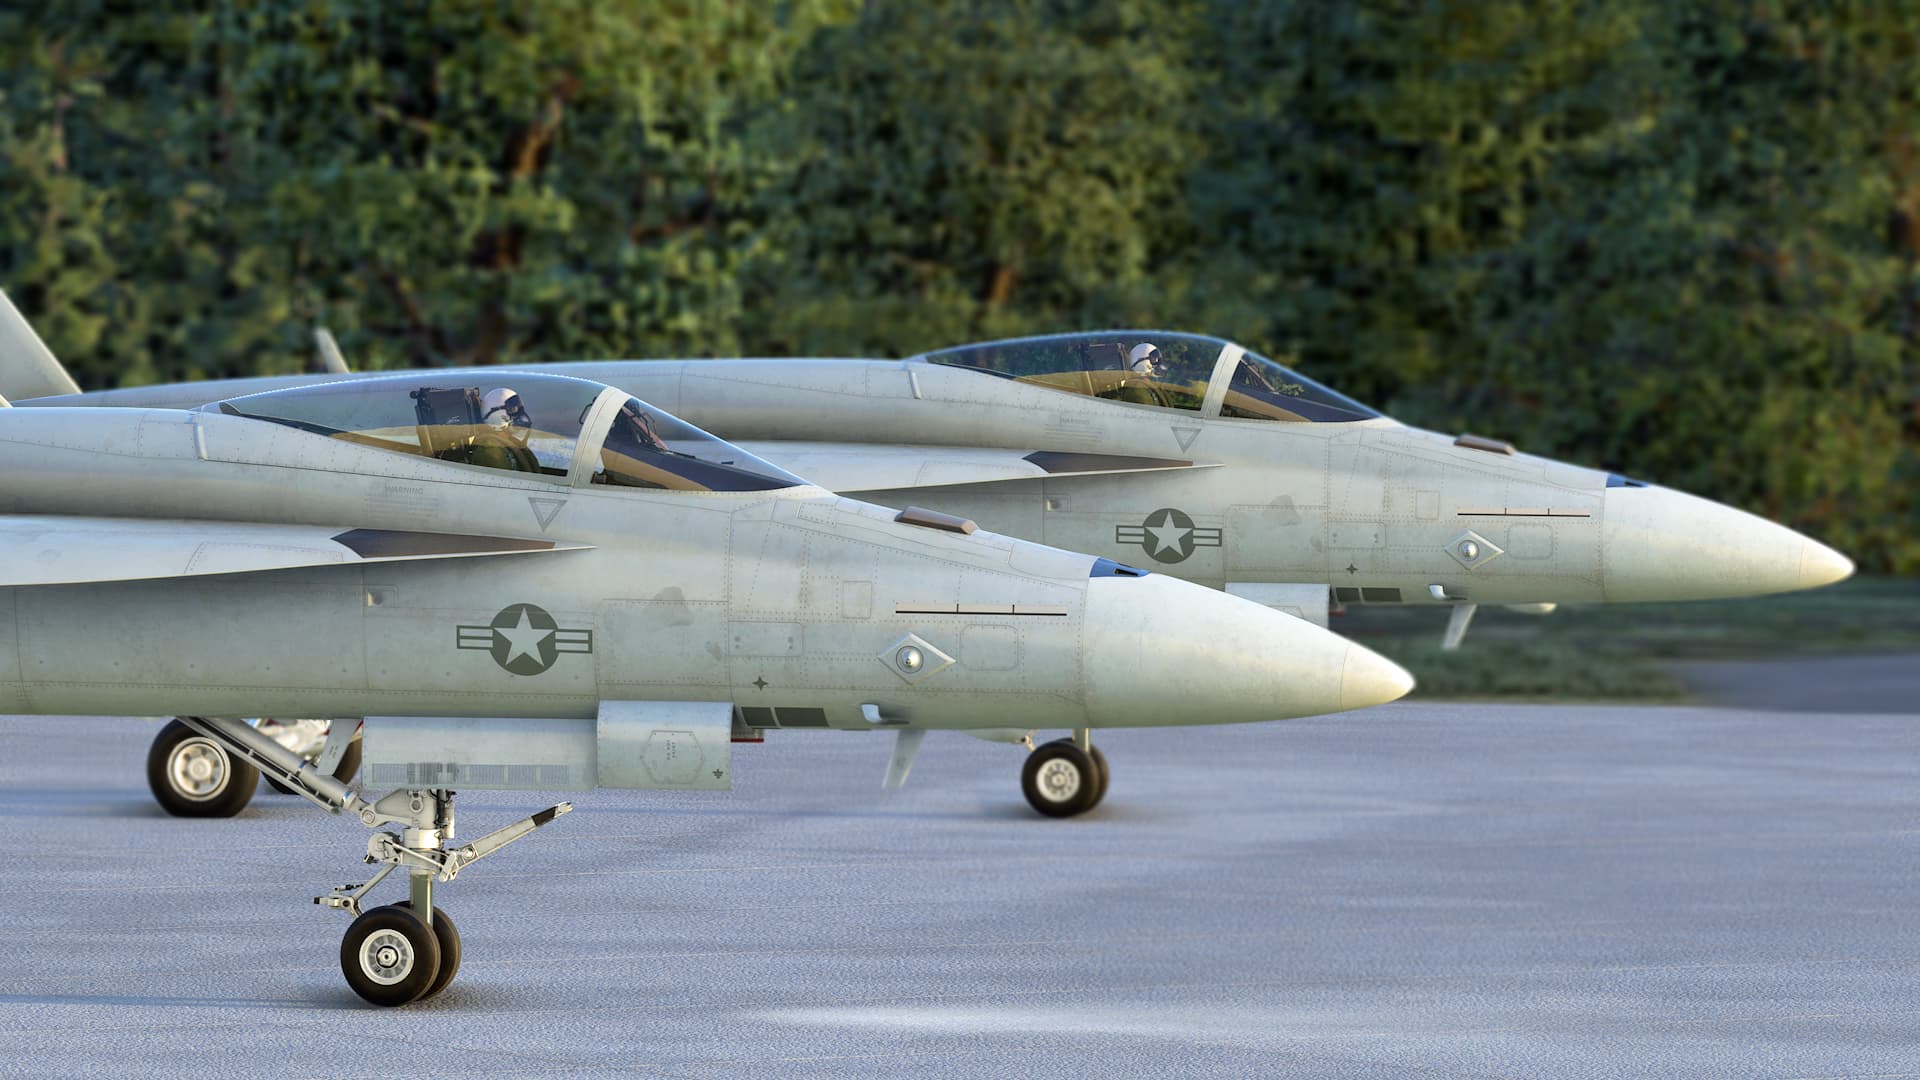 A side view of the cockpit and nose sections of two F/A-18 Super Hornets parked on the ground together. There are green trees visible in the background.